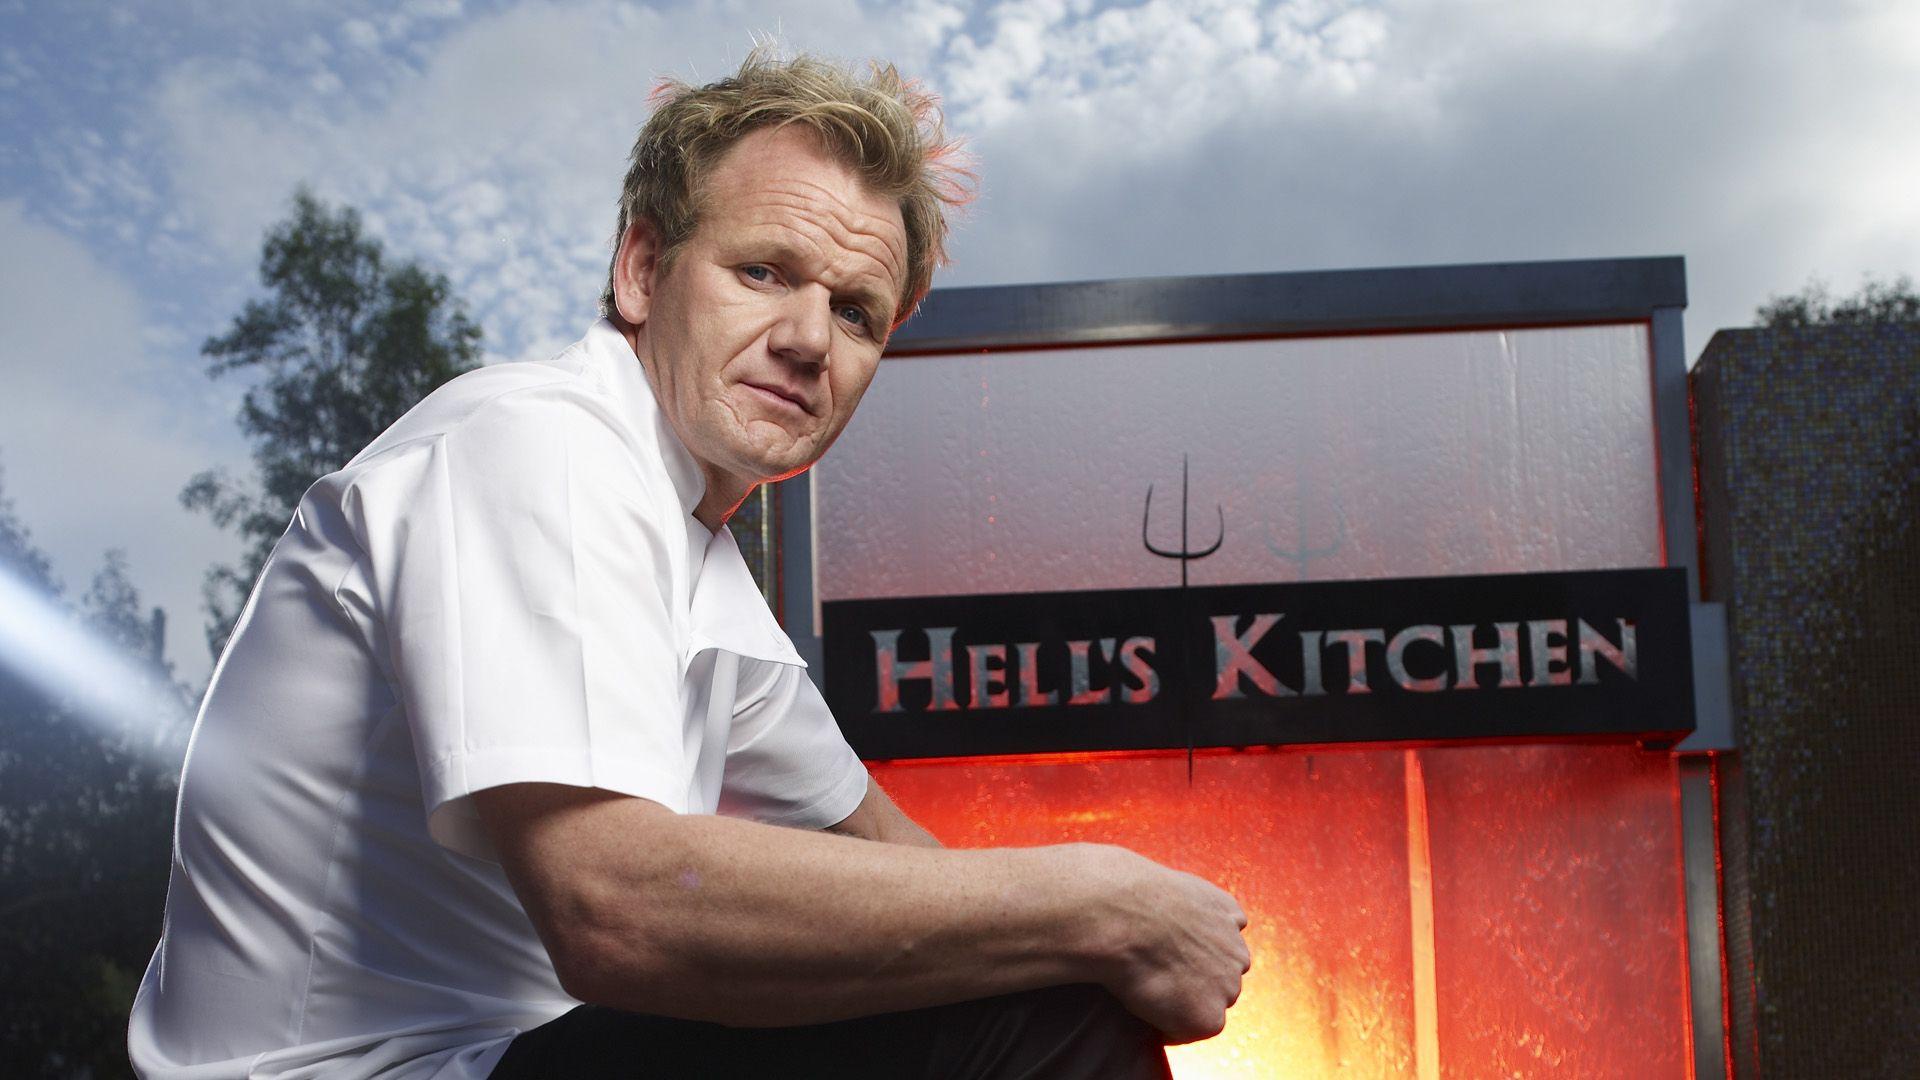 Download 1920x1080 Gordon Ramsay In Hell's Kitchen Poster Wallpaper